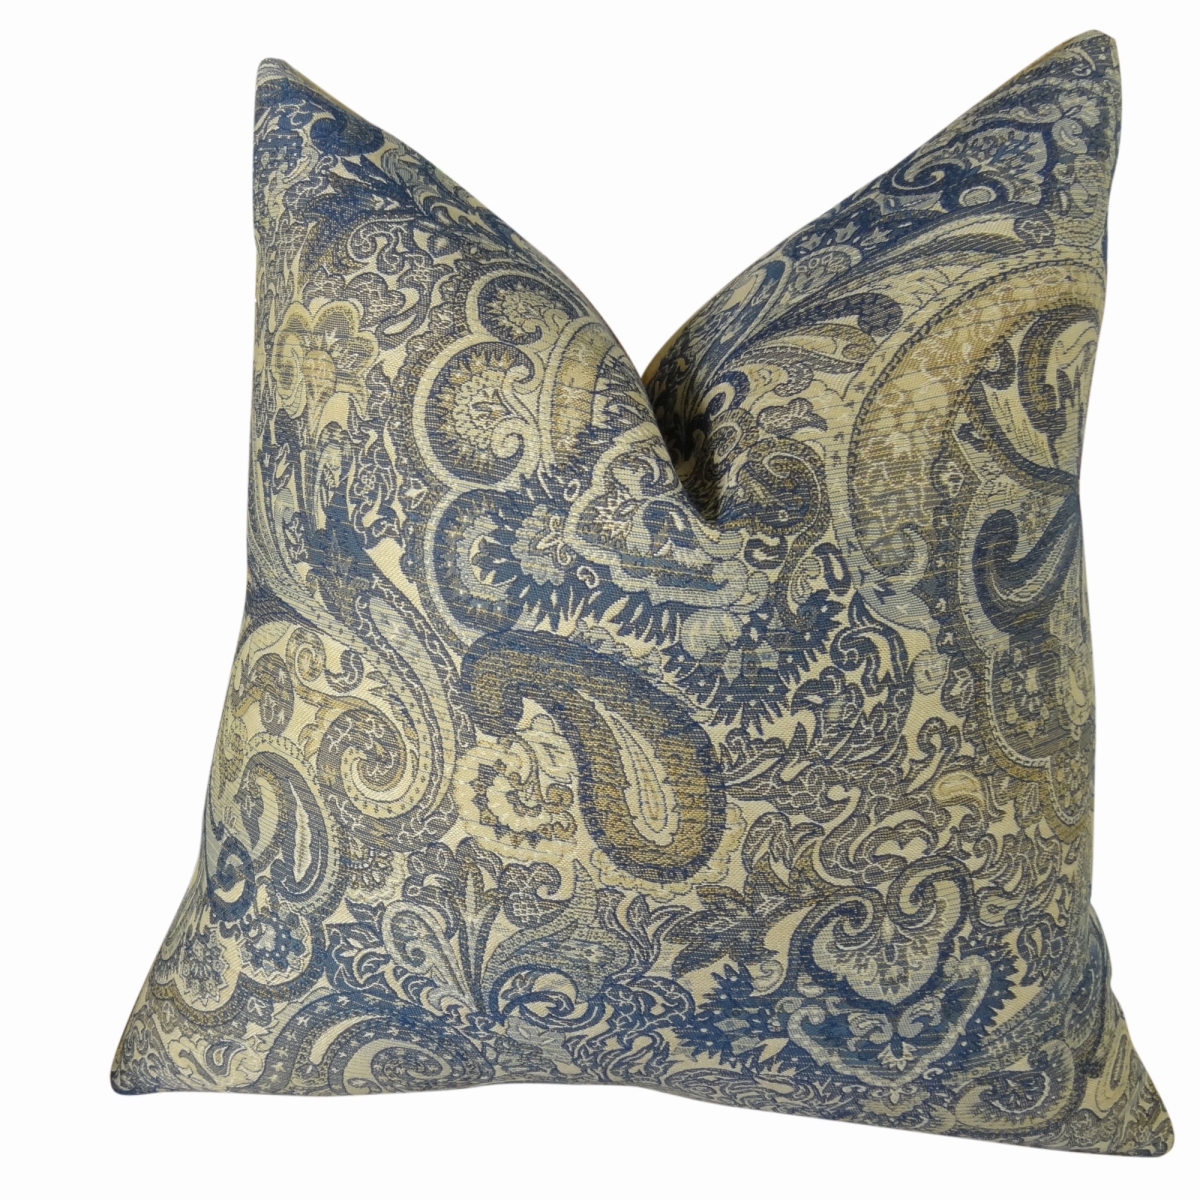 20 x 36 in. King Size Paciotti Handmade Throw Pillow - Navy - Blue & Taupe -  DwellingDesigns, DW3126183